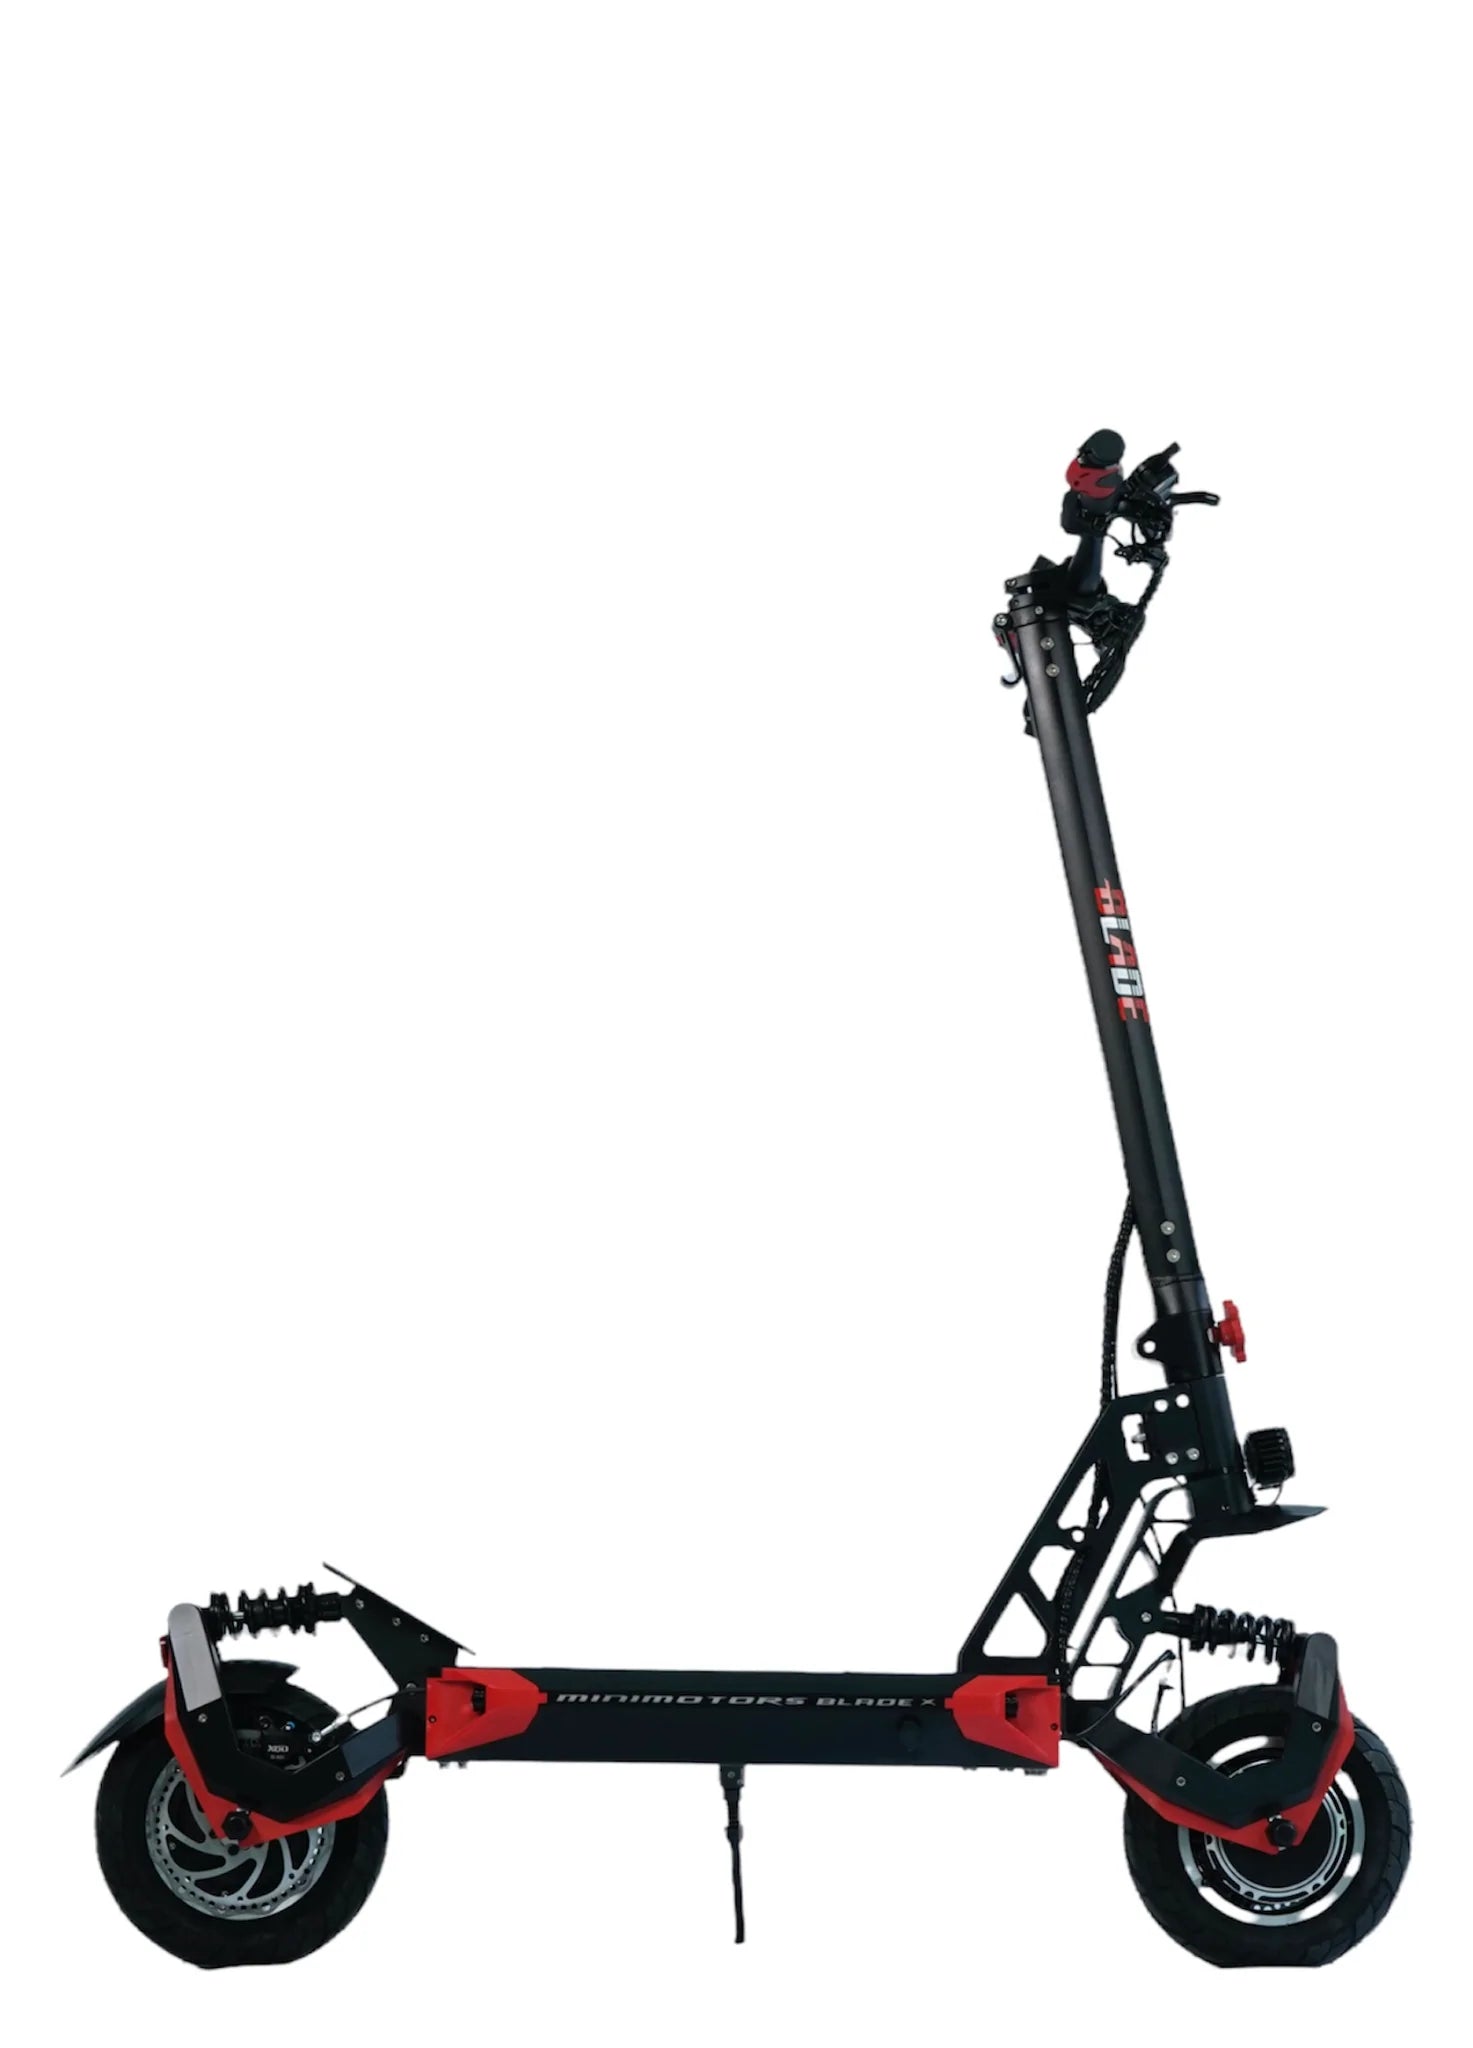 Blade Electric Scooters Melbourne Buy Online Hyped Rides